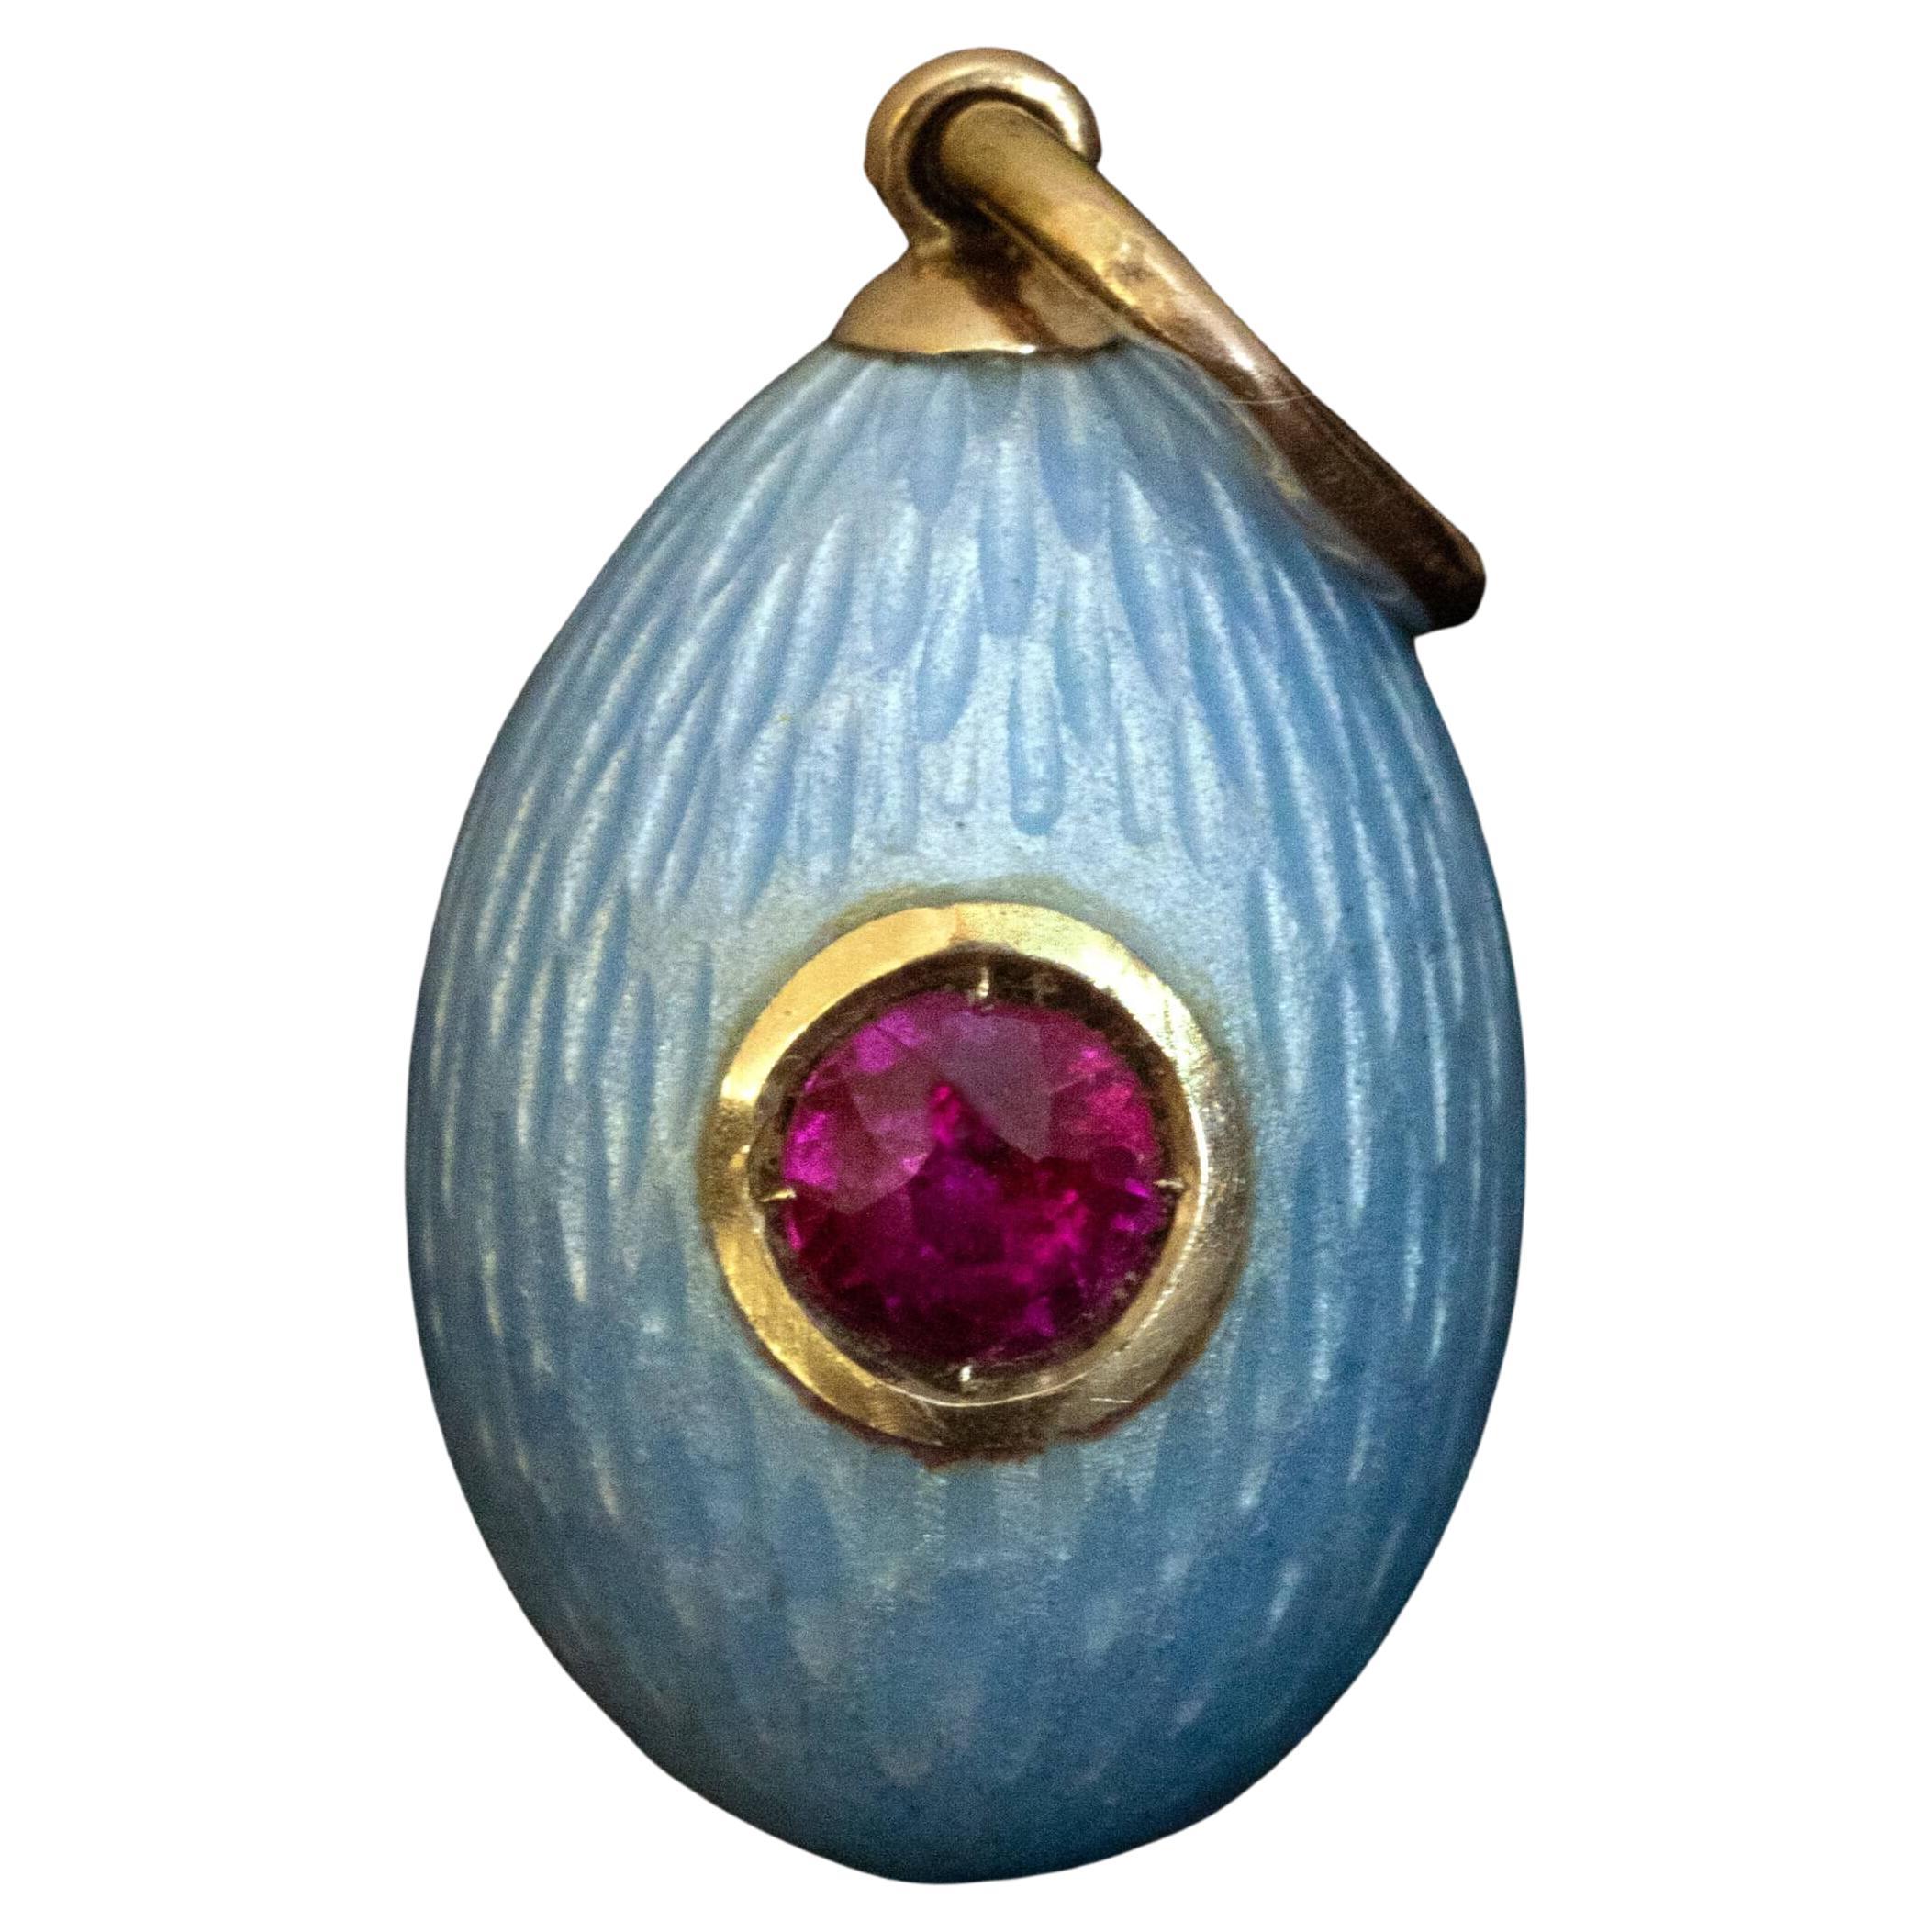 What are Fabergé eggs made out of?